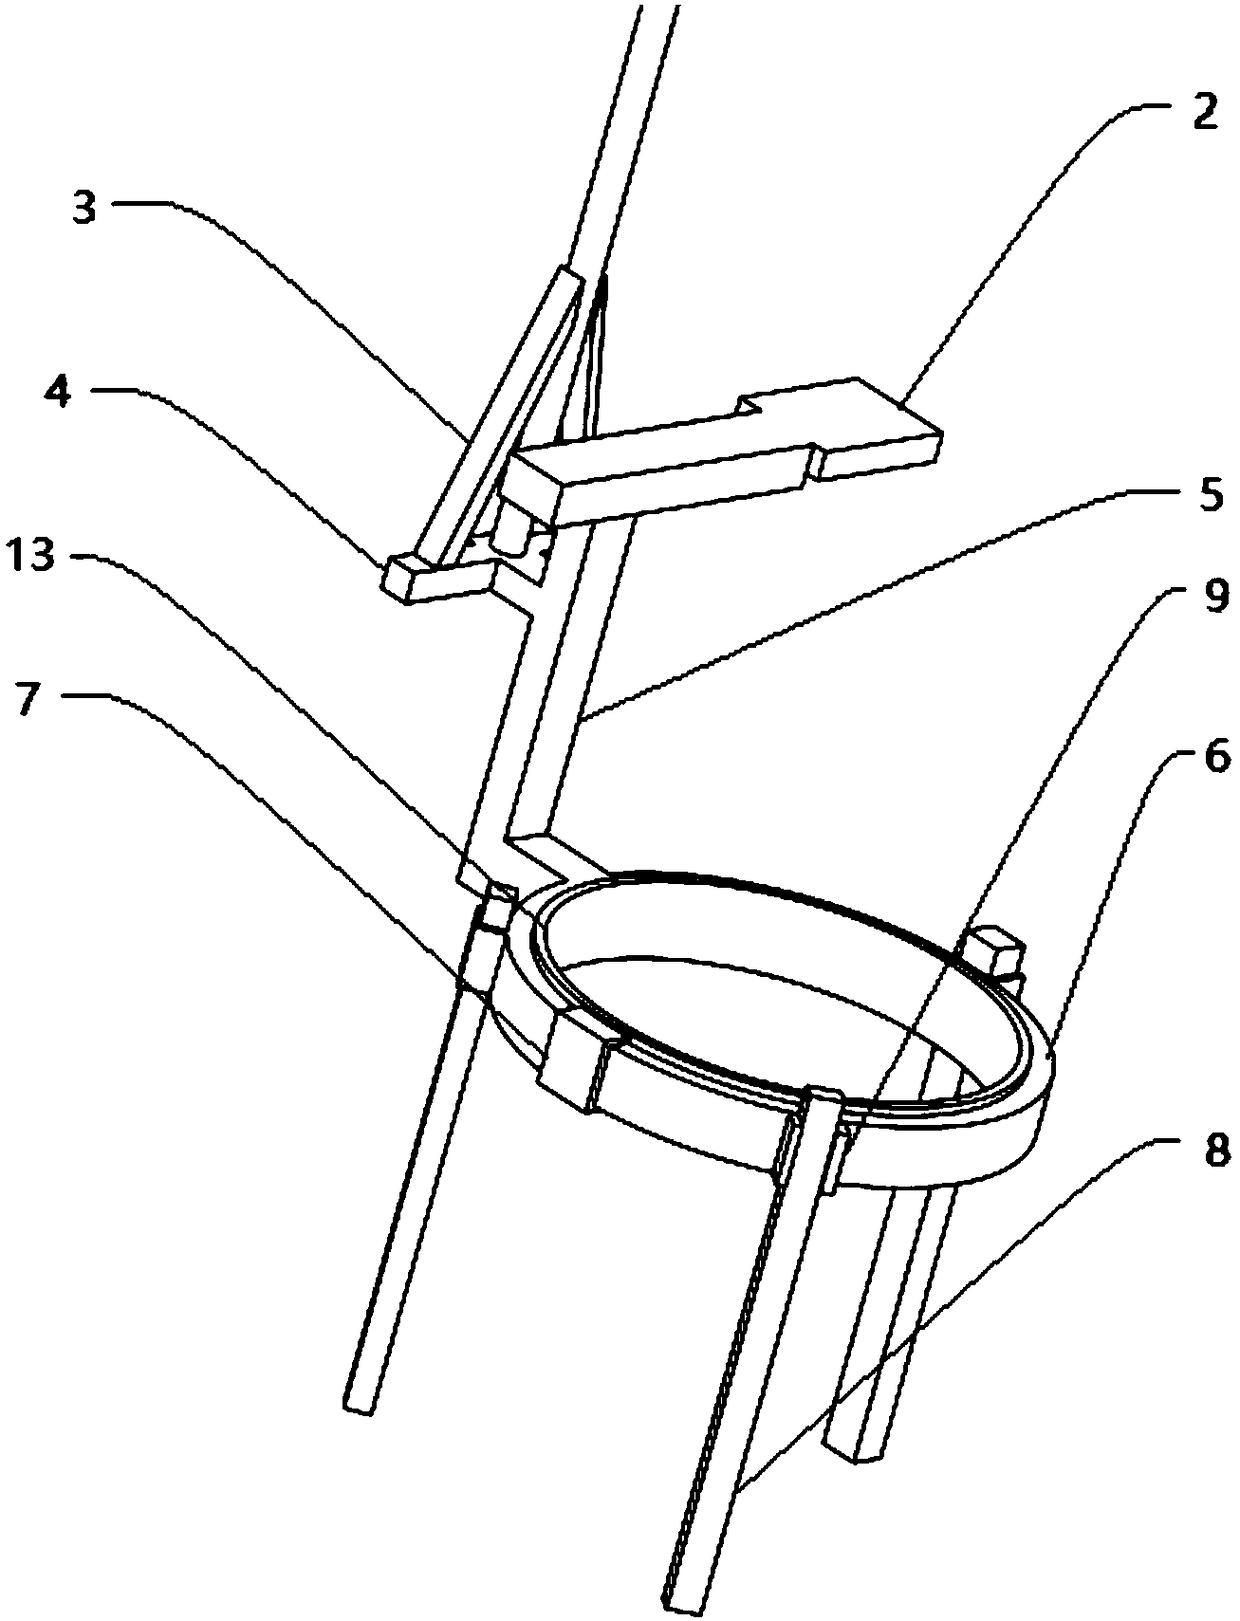 Auxiliary device for medical infusion support